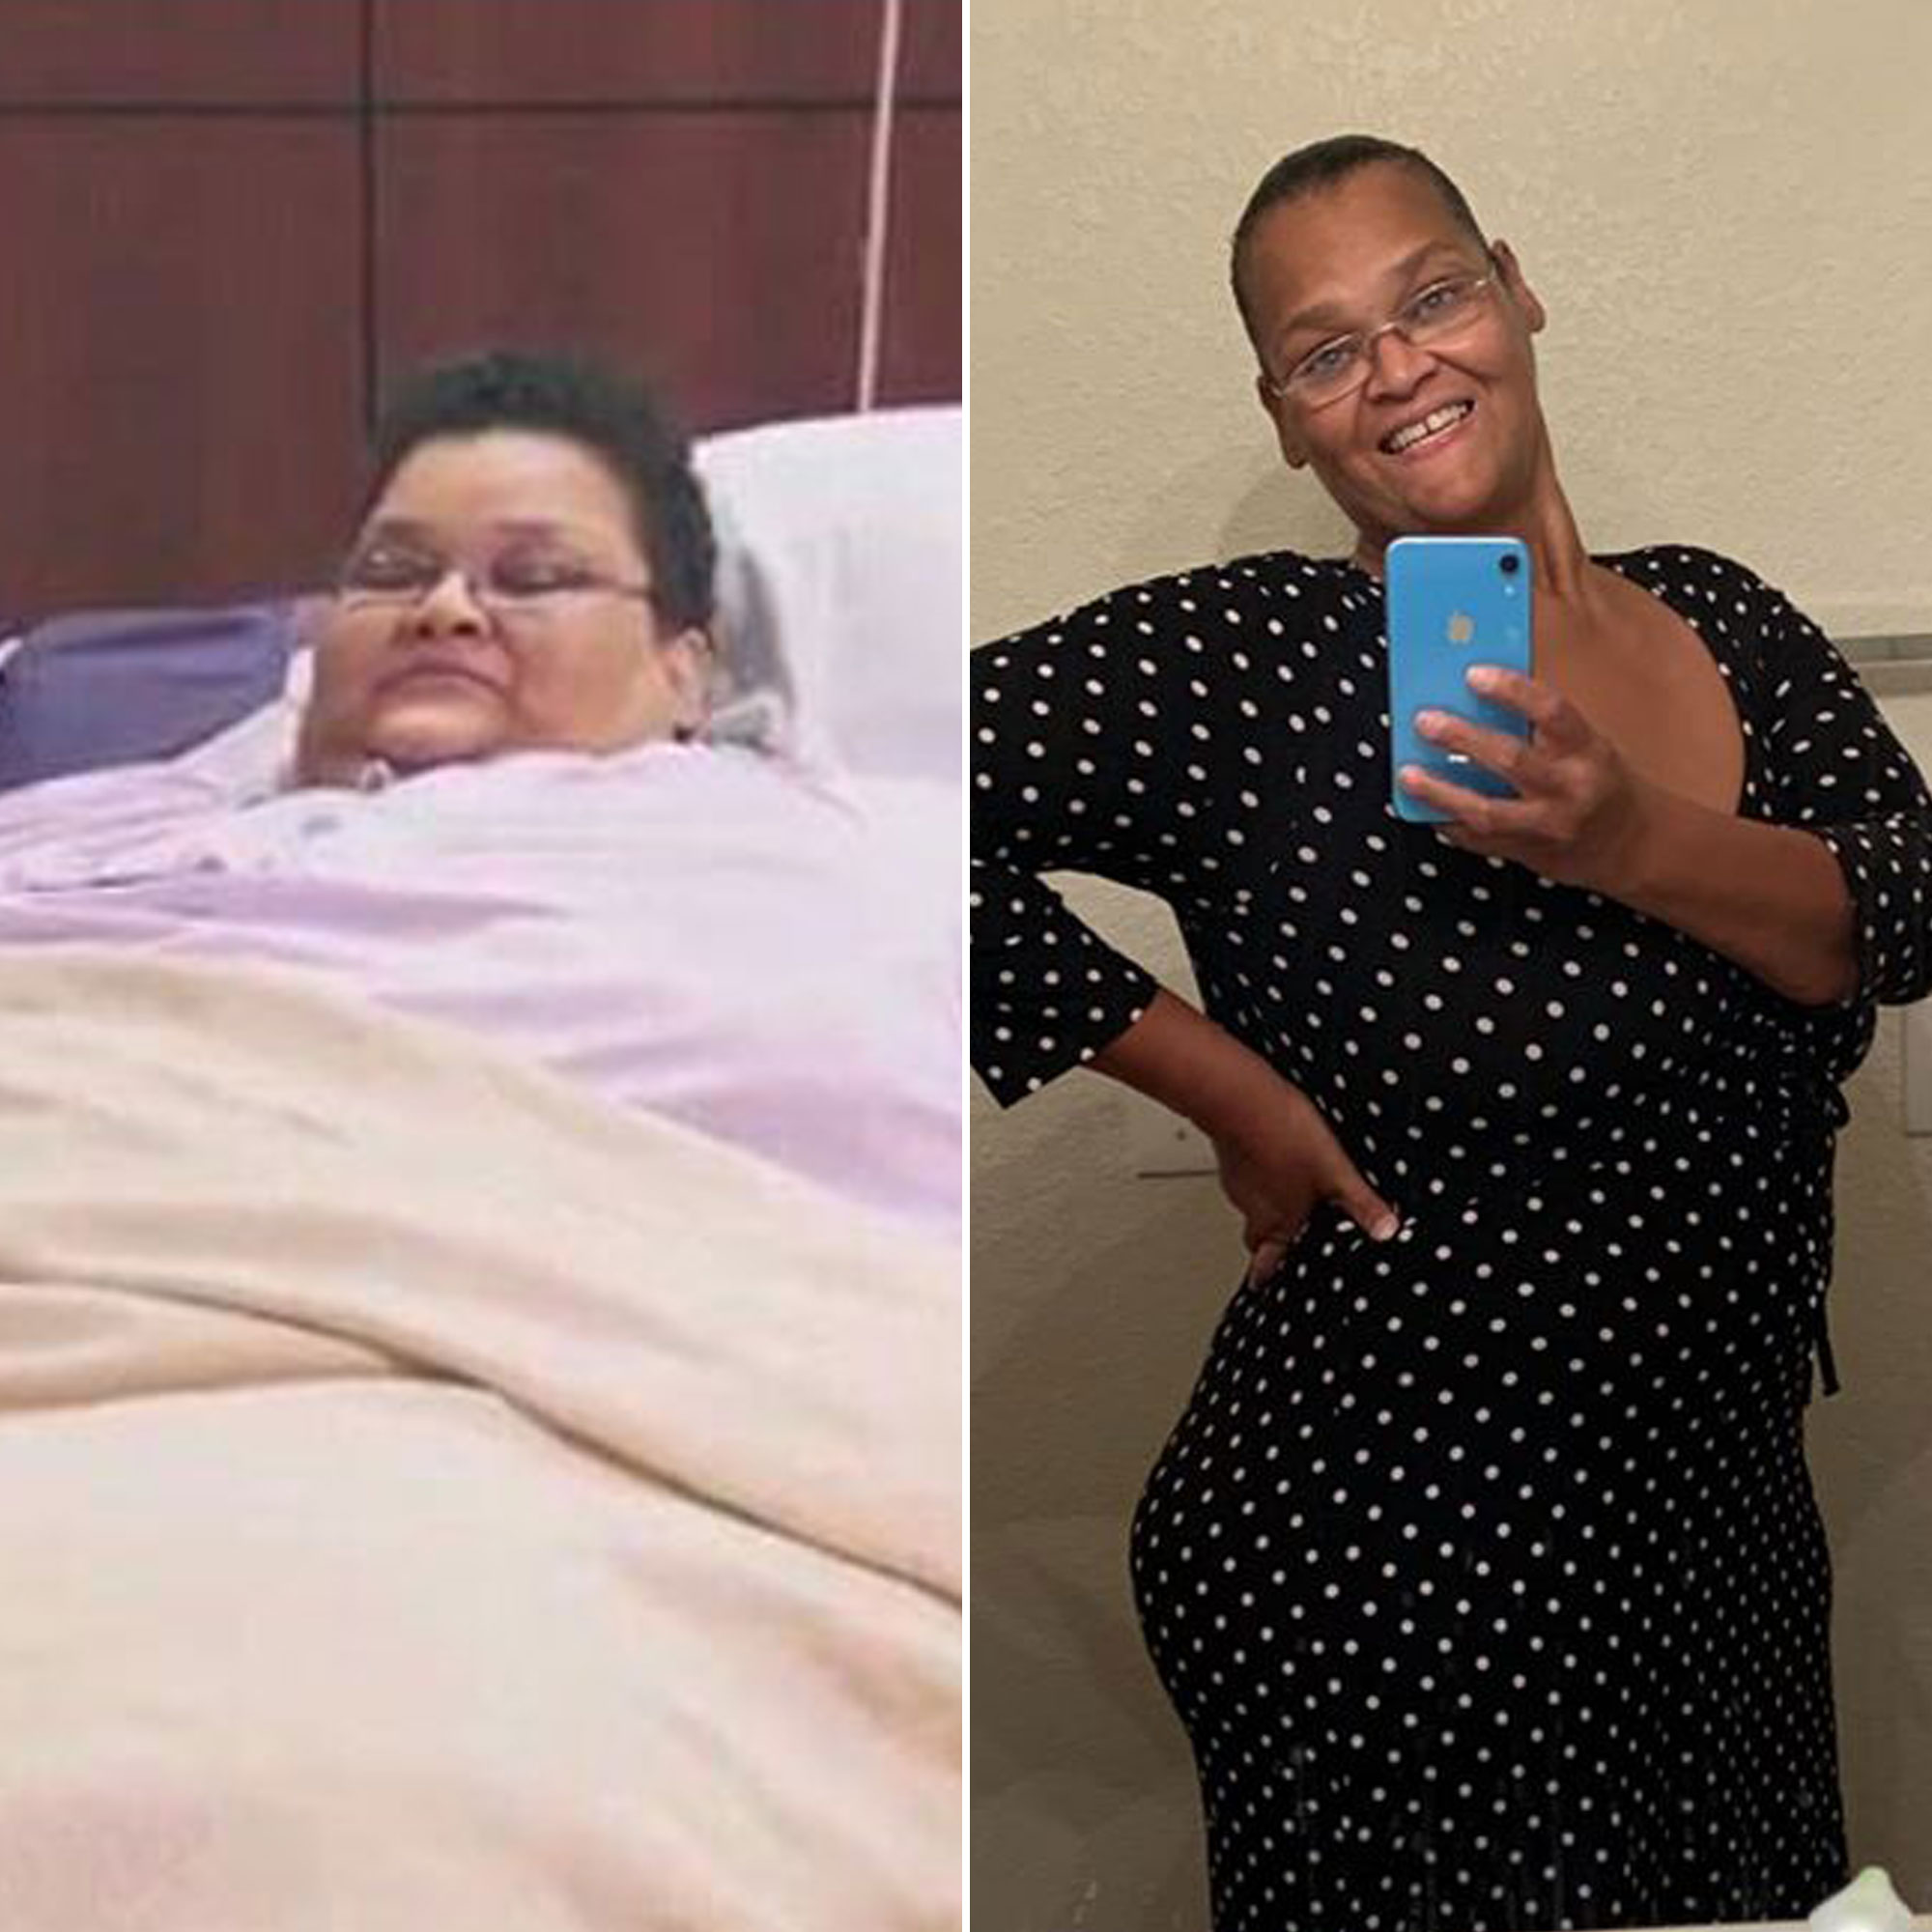 New Lease on Life! A Look Back at the Most Inspiring 'My 600Lb Life